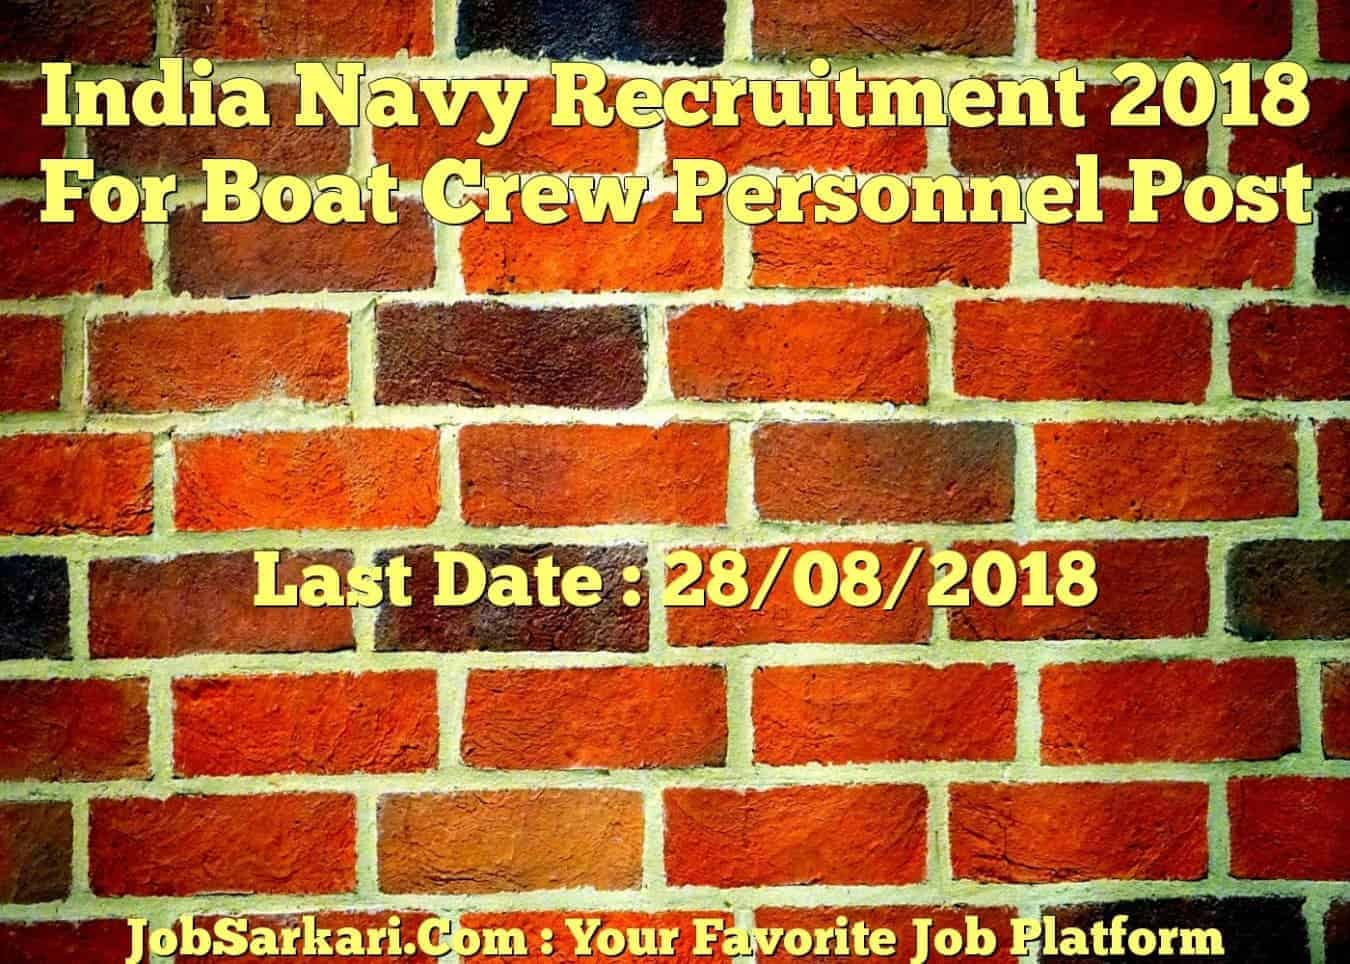 India Navy Recruitment 2018 For Boat Crew Personnel Post